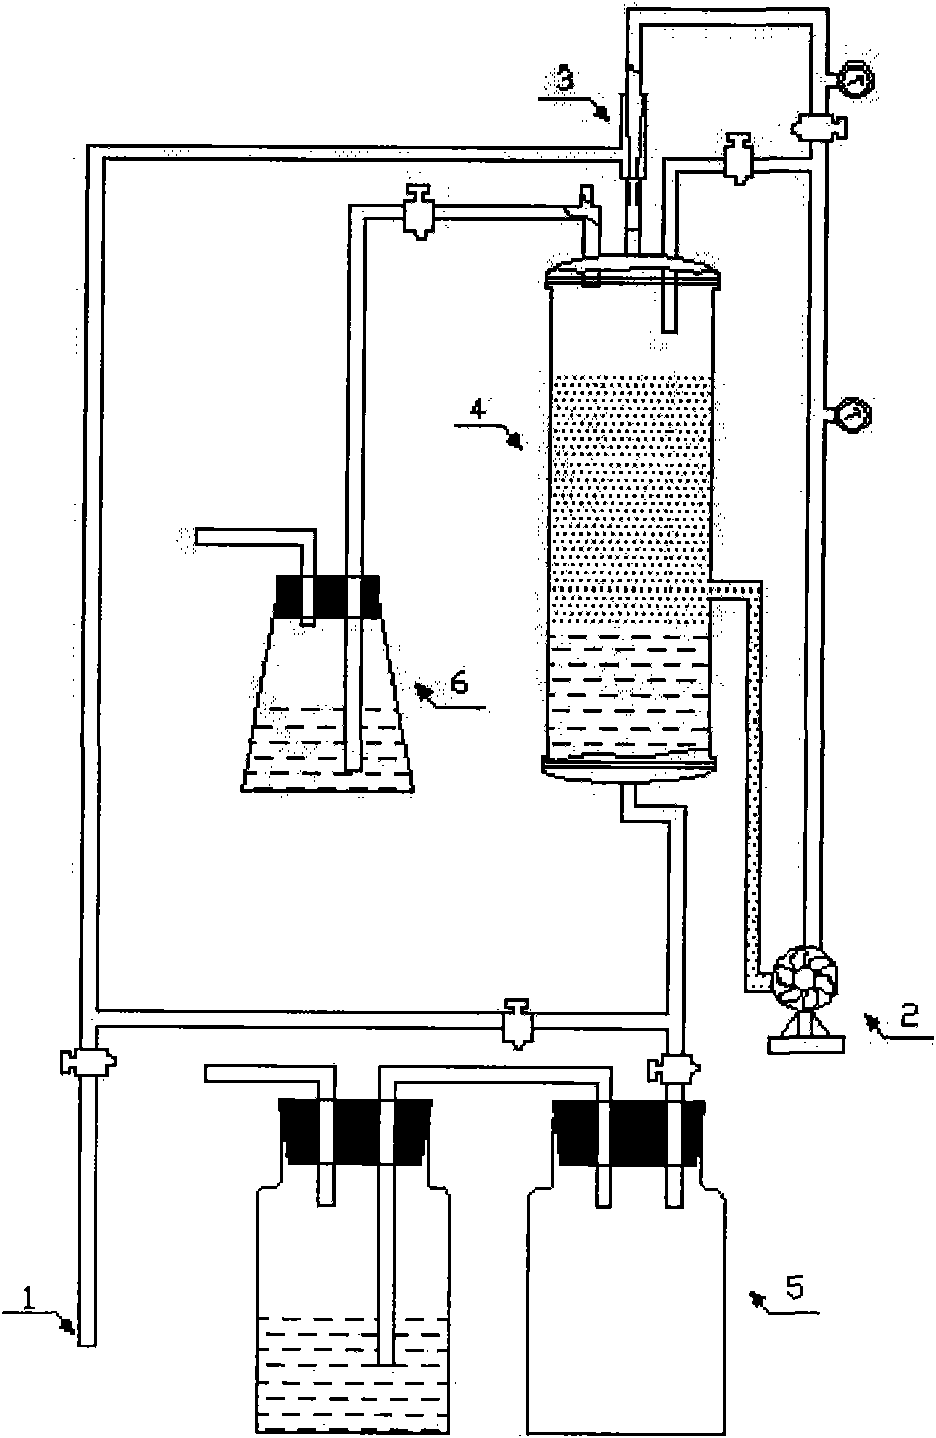 Novel extraction process method for purifying germanium tetrachloride